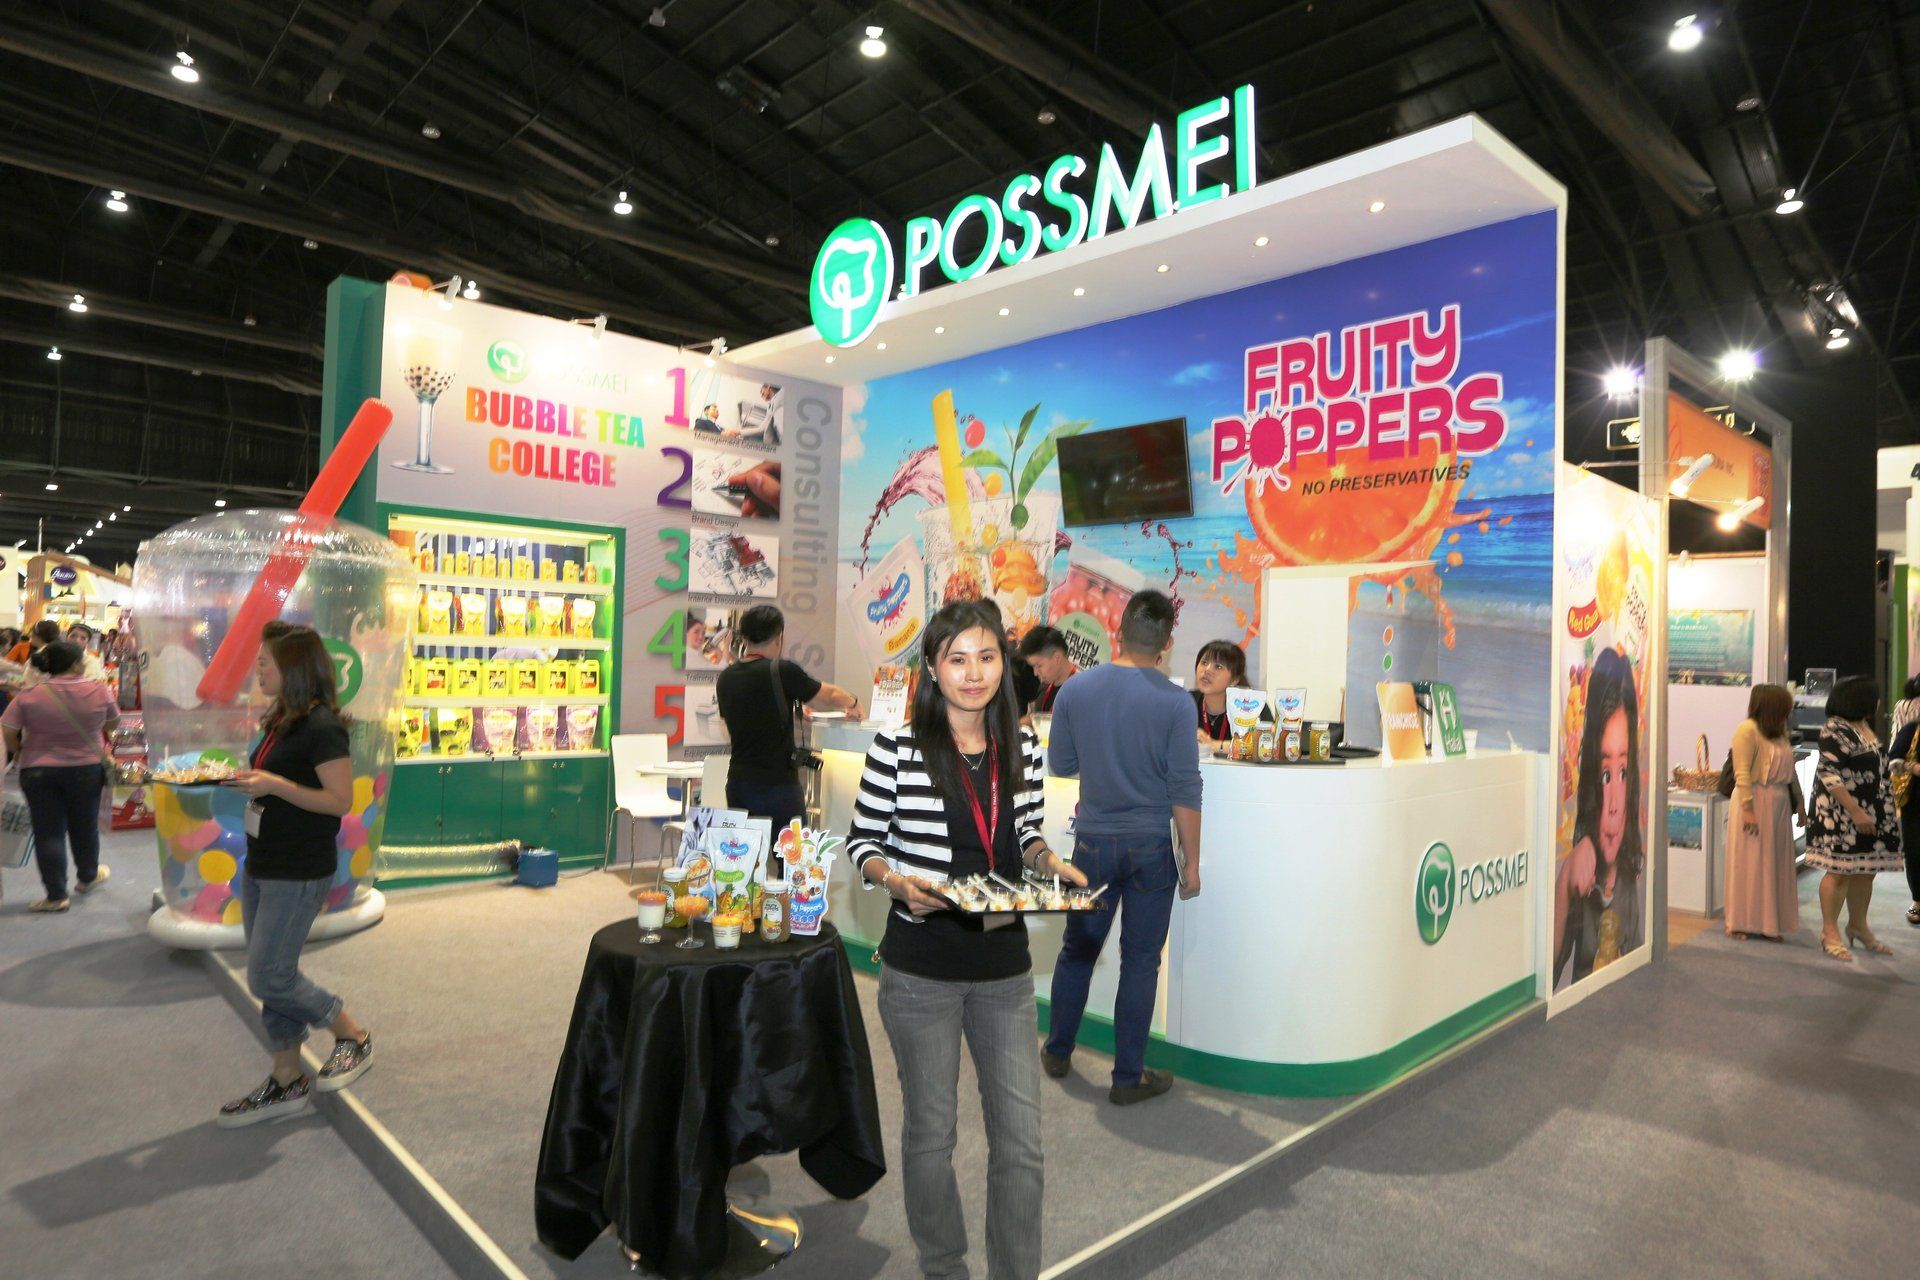 Possmei @ Thaifex 2015. Booth designed and built by Essential Global Fairs.